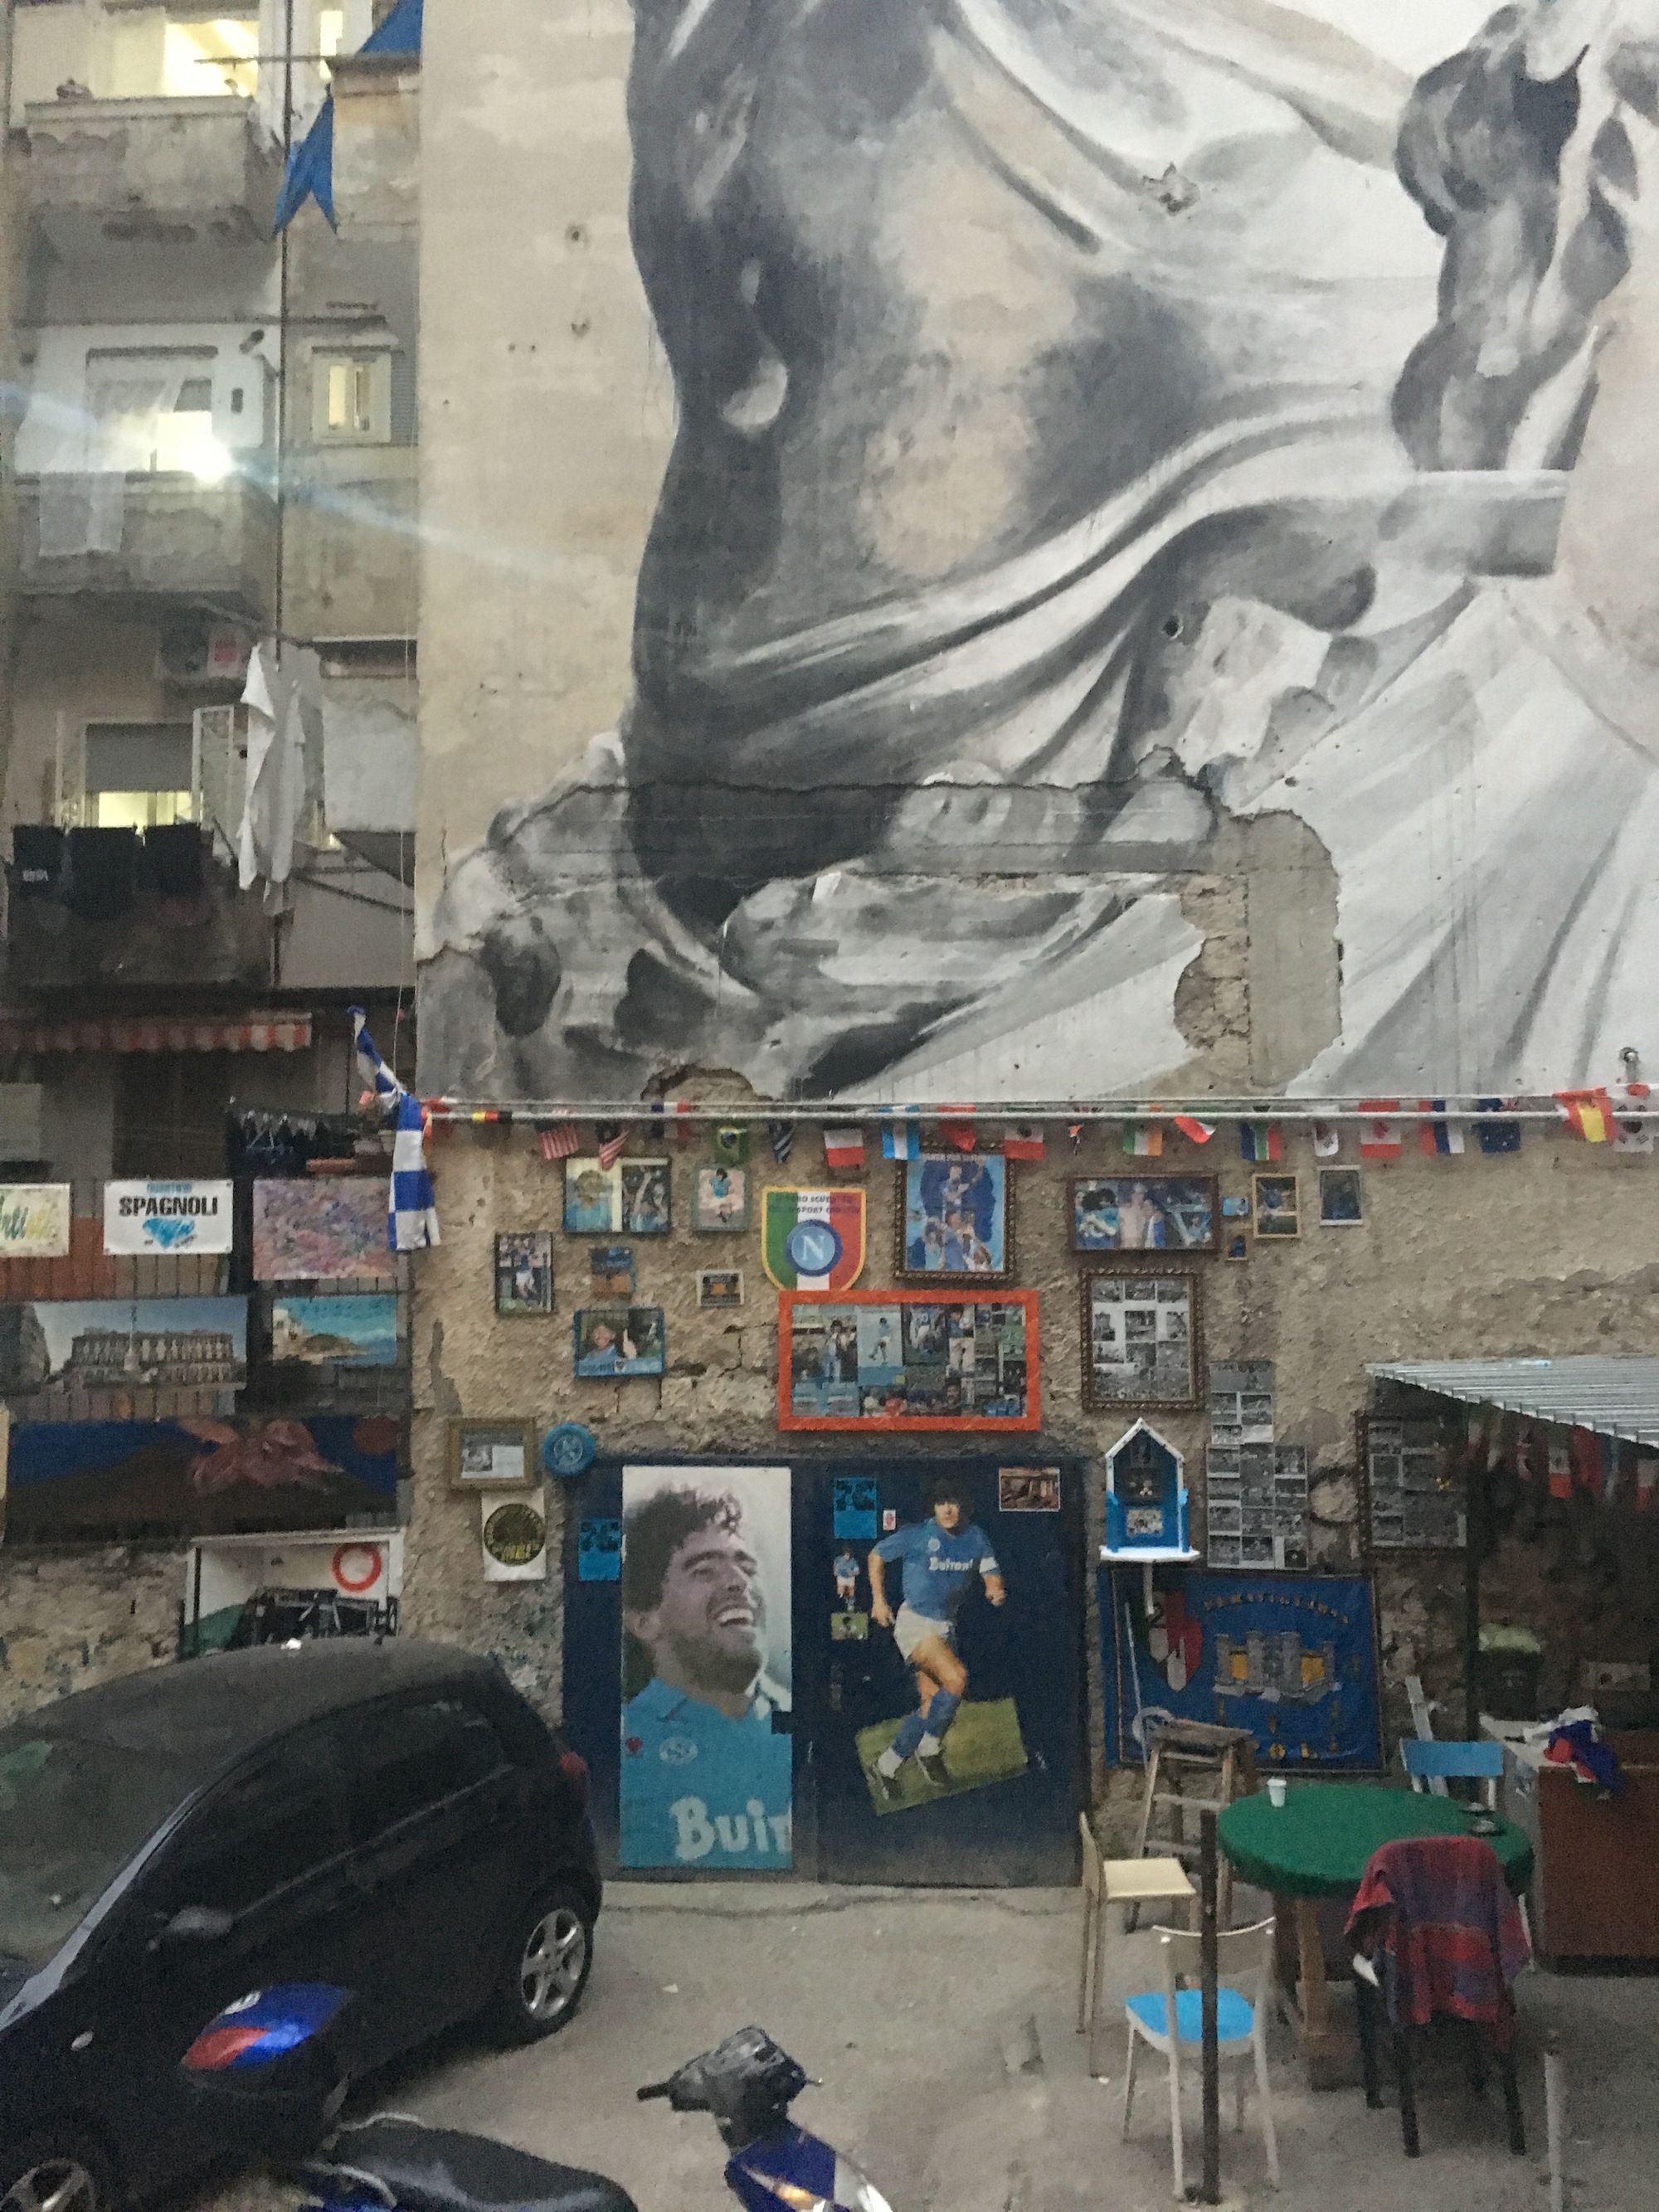 Maradona mural and shrine in Naples. Photographs by author